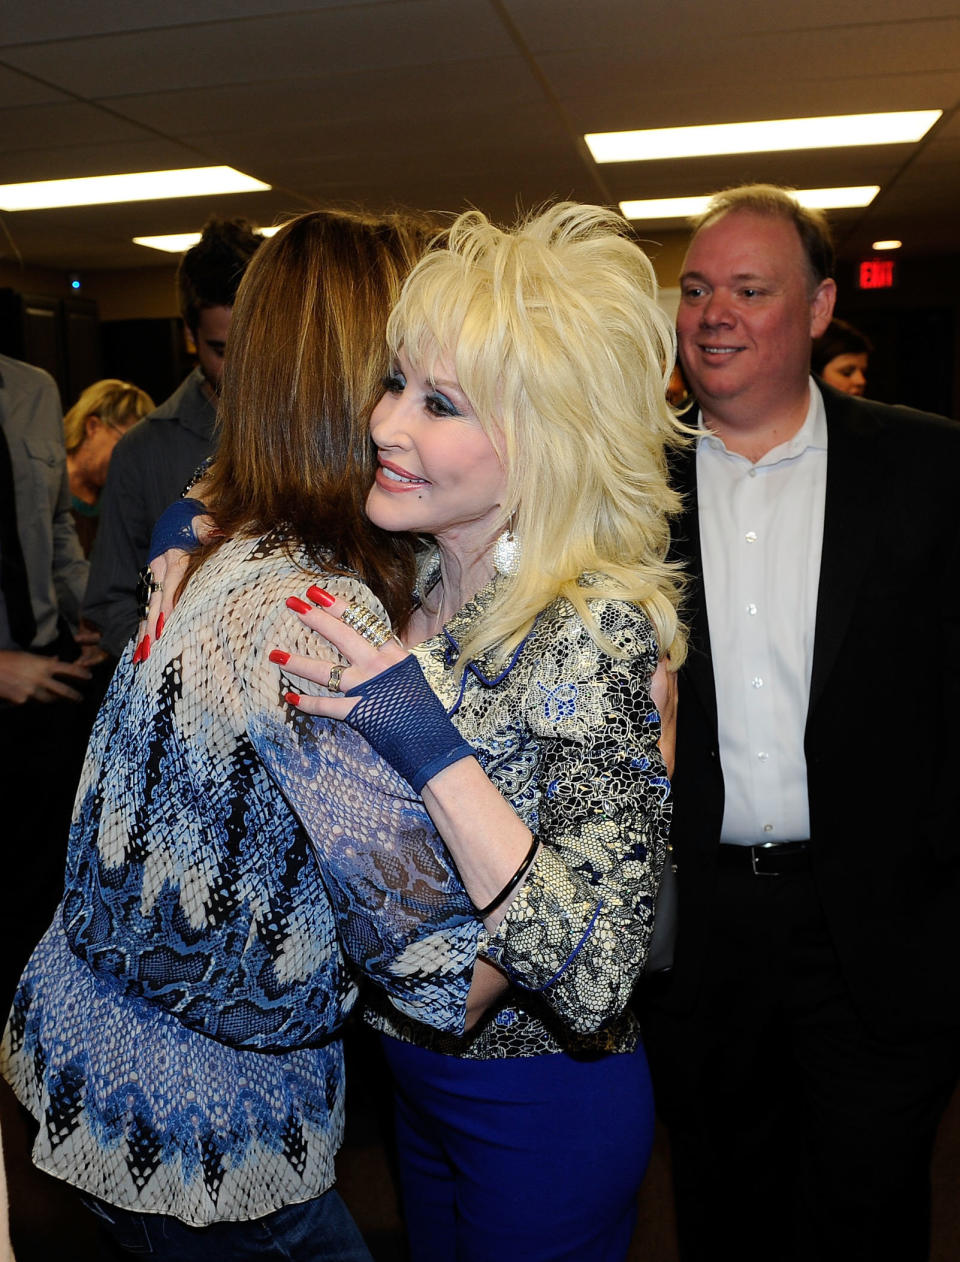 "I just don't feel like I have to explain myself. I love everybody." (via <a href="http://abcnews.go.com/Entertainment/dolly-parton-gay-rumors-losing-drag-queen-alike/story?id=17812138">Nightline</a>)